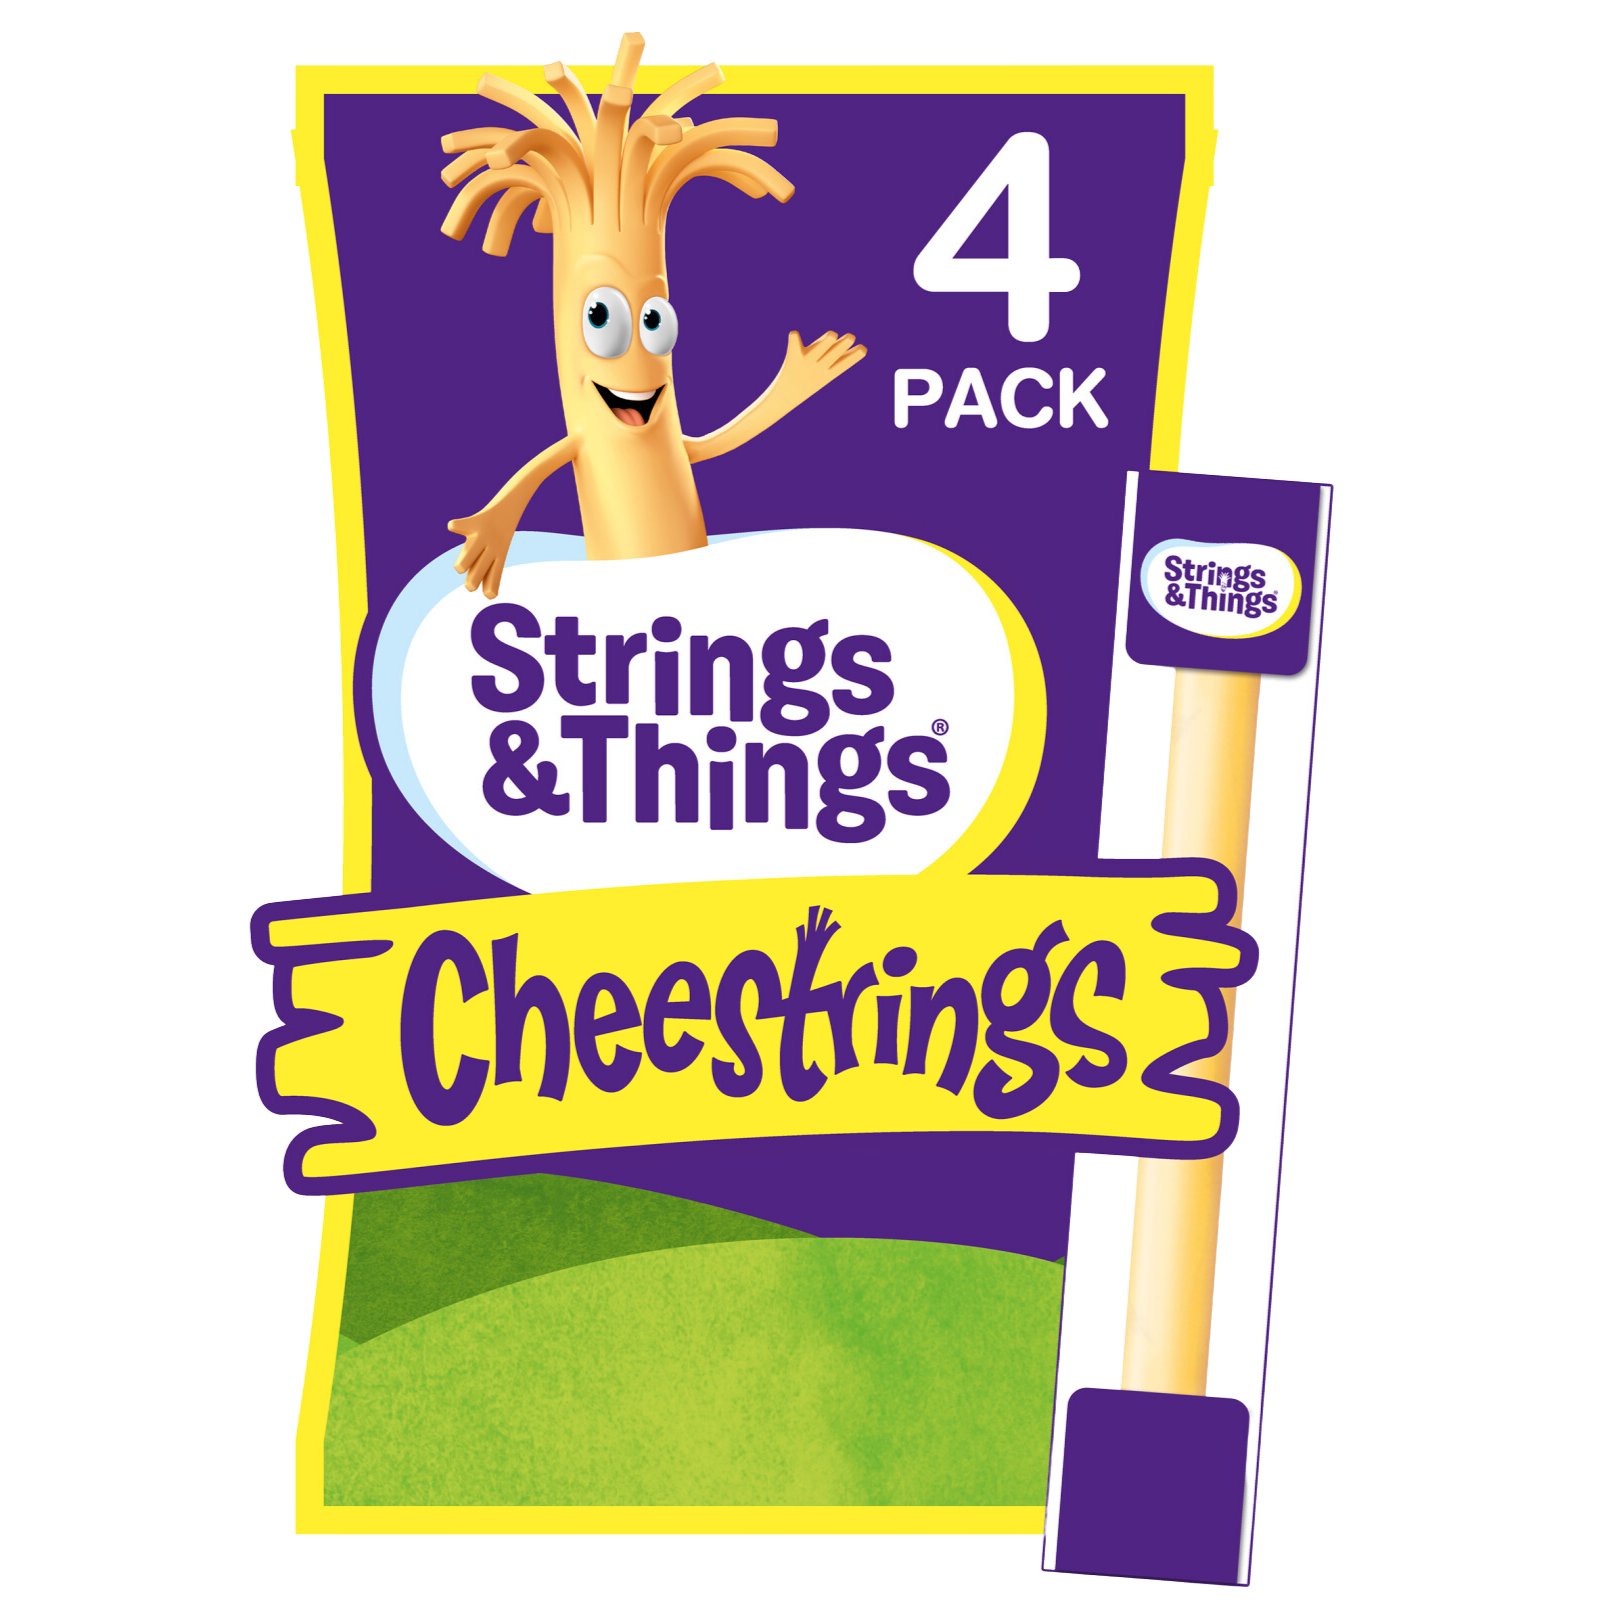 Cheestrings Cheese Snack, 4 x 20g